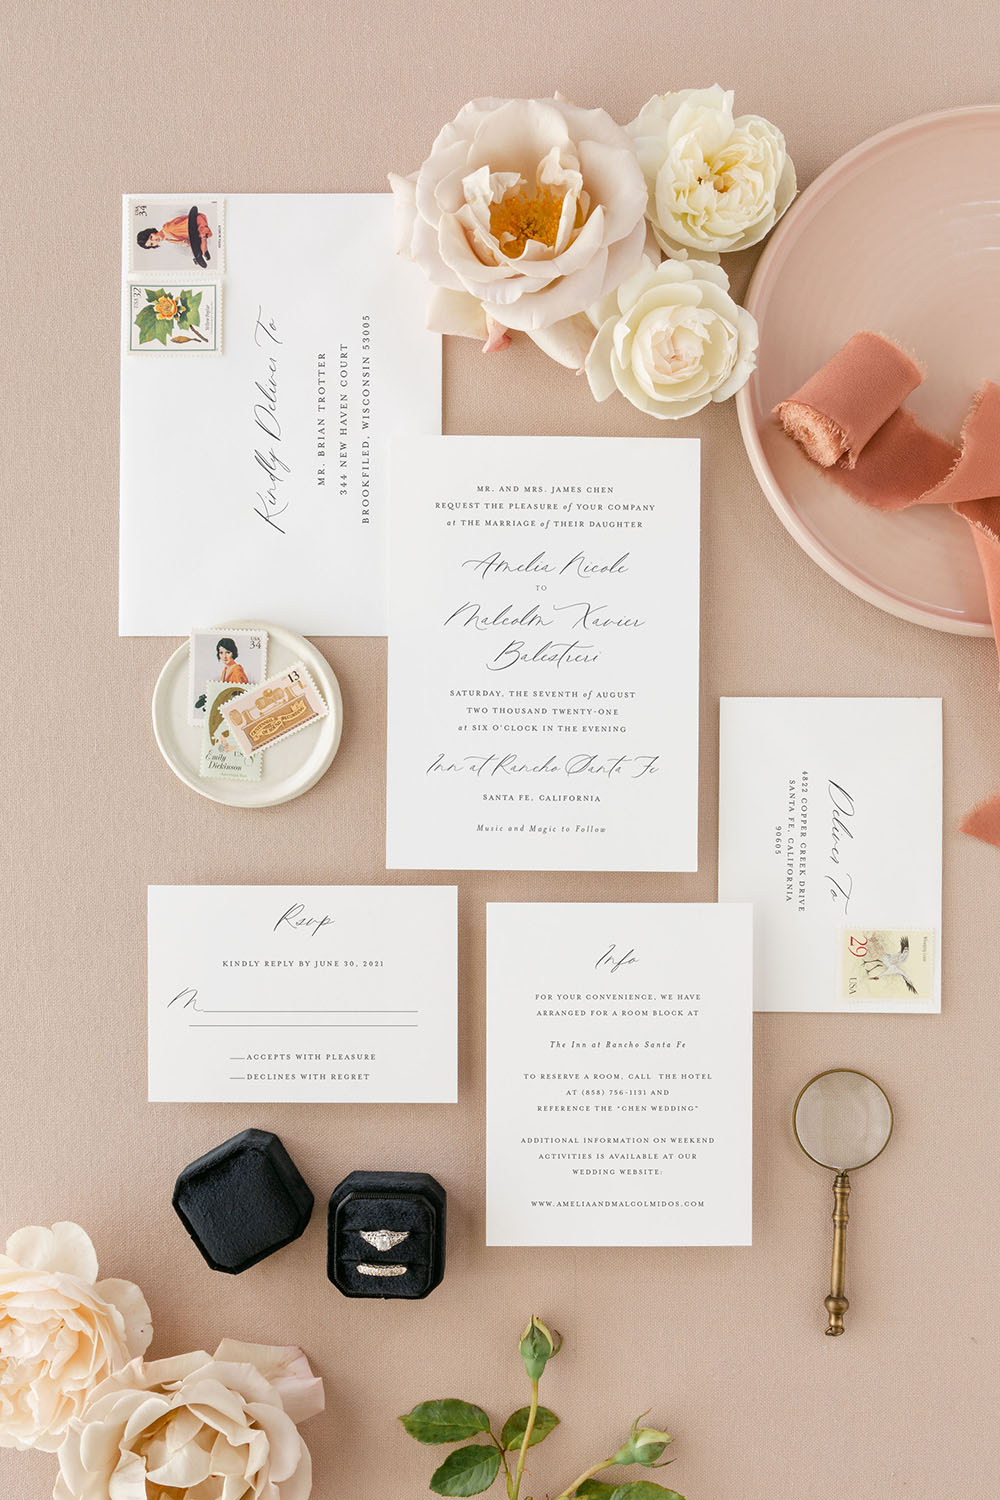 How to Address your Wedding Invitations  Our guide to addressing wedding  invitation envelopes according to etiquette